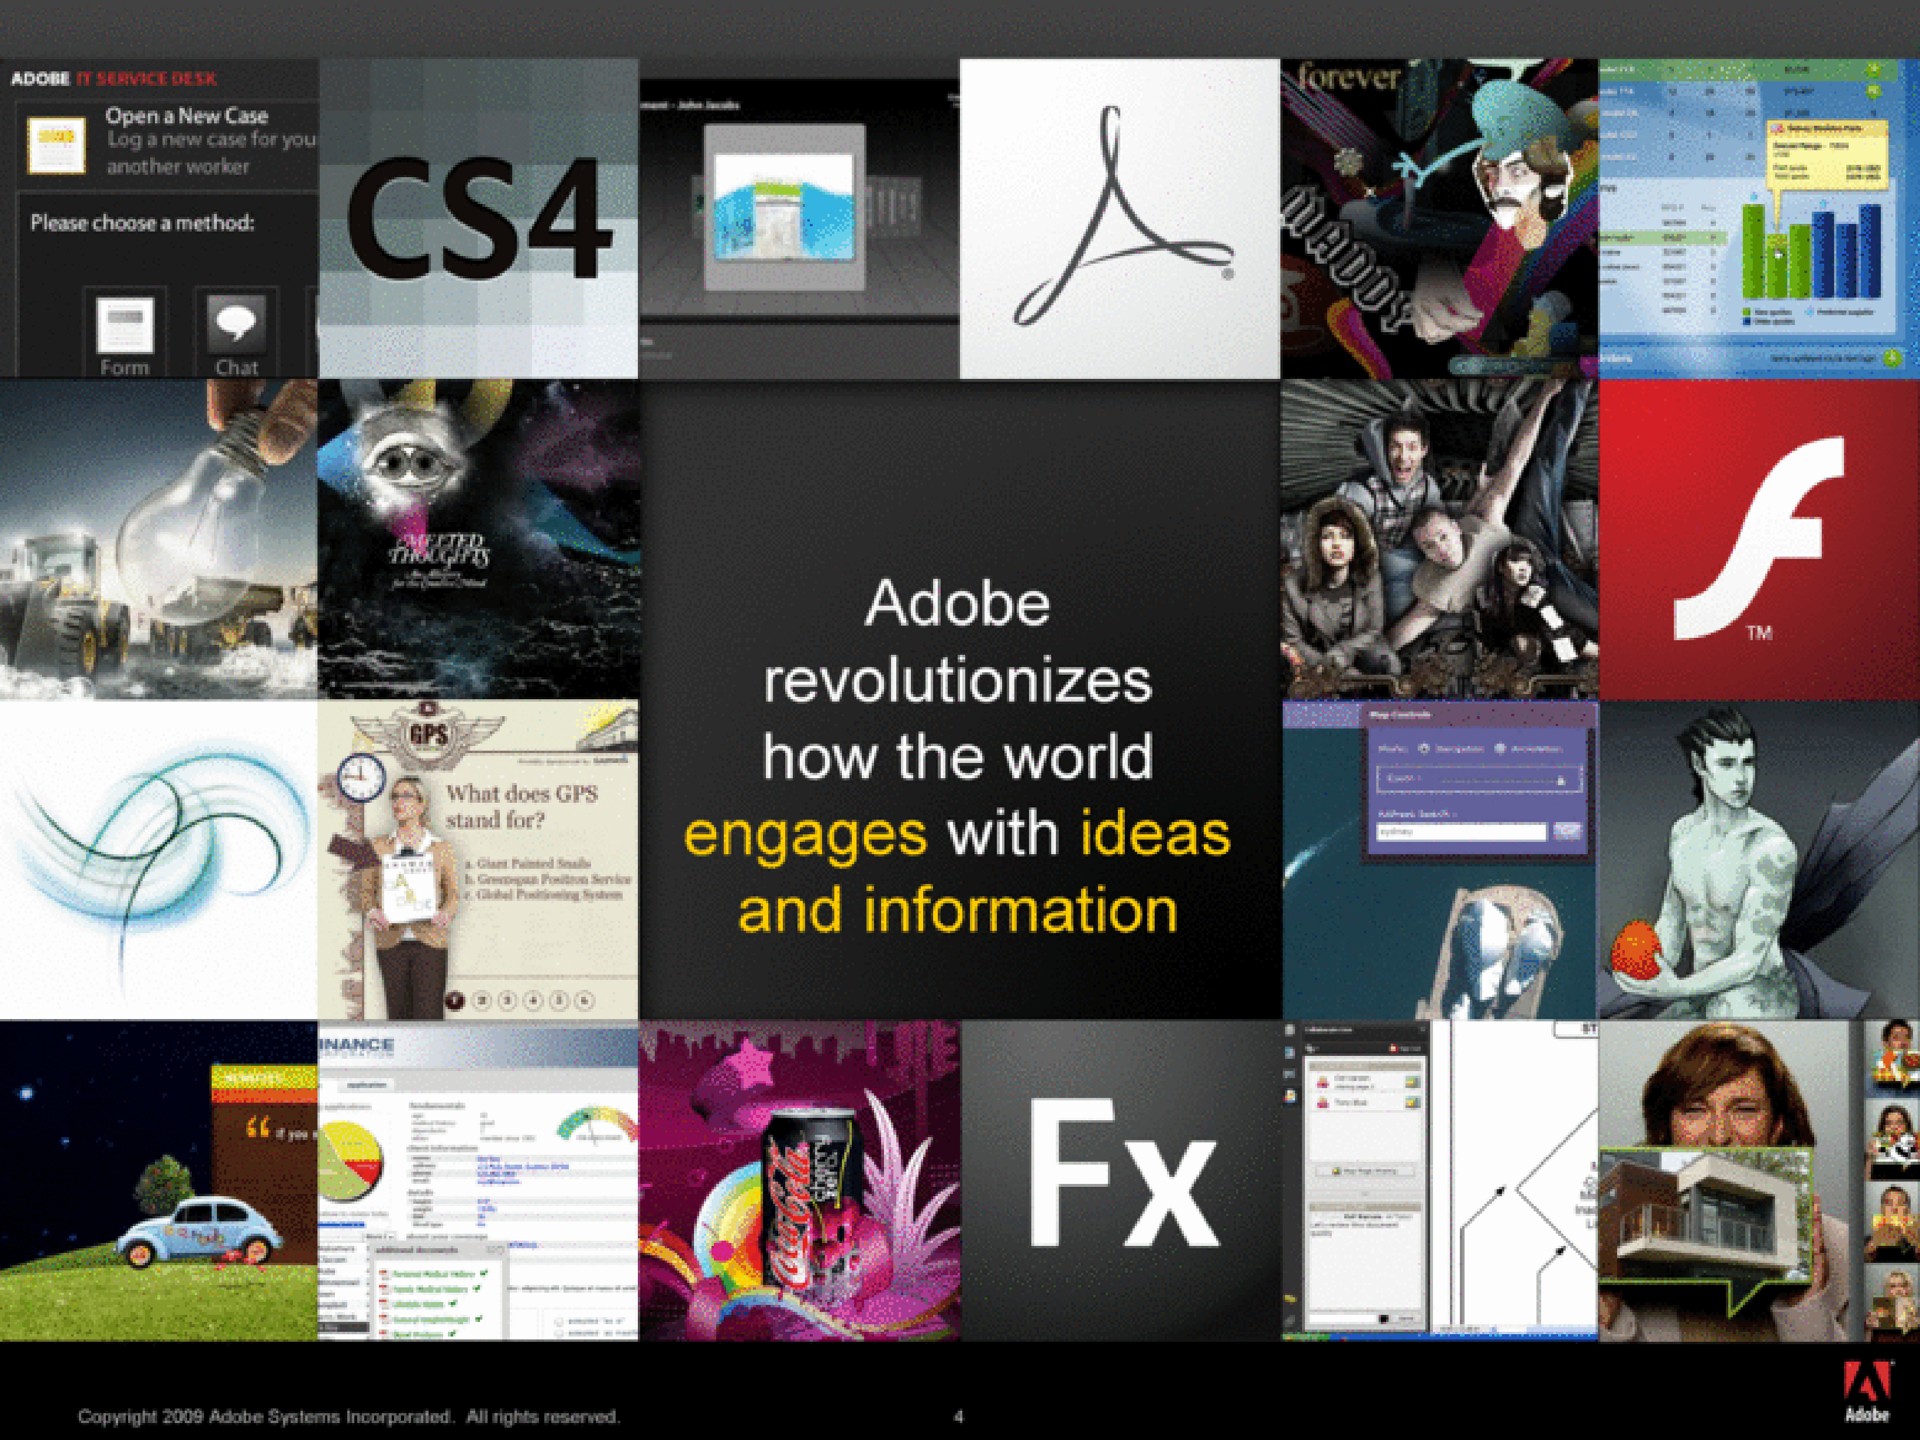 adobe revolutionizes how the world engages with ideas and information | Adobe